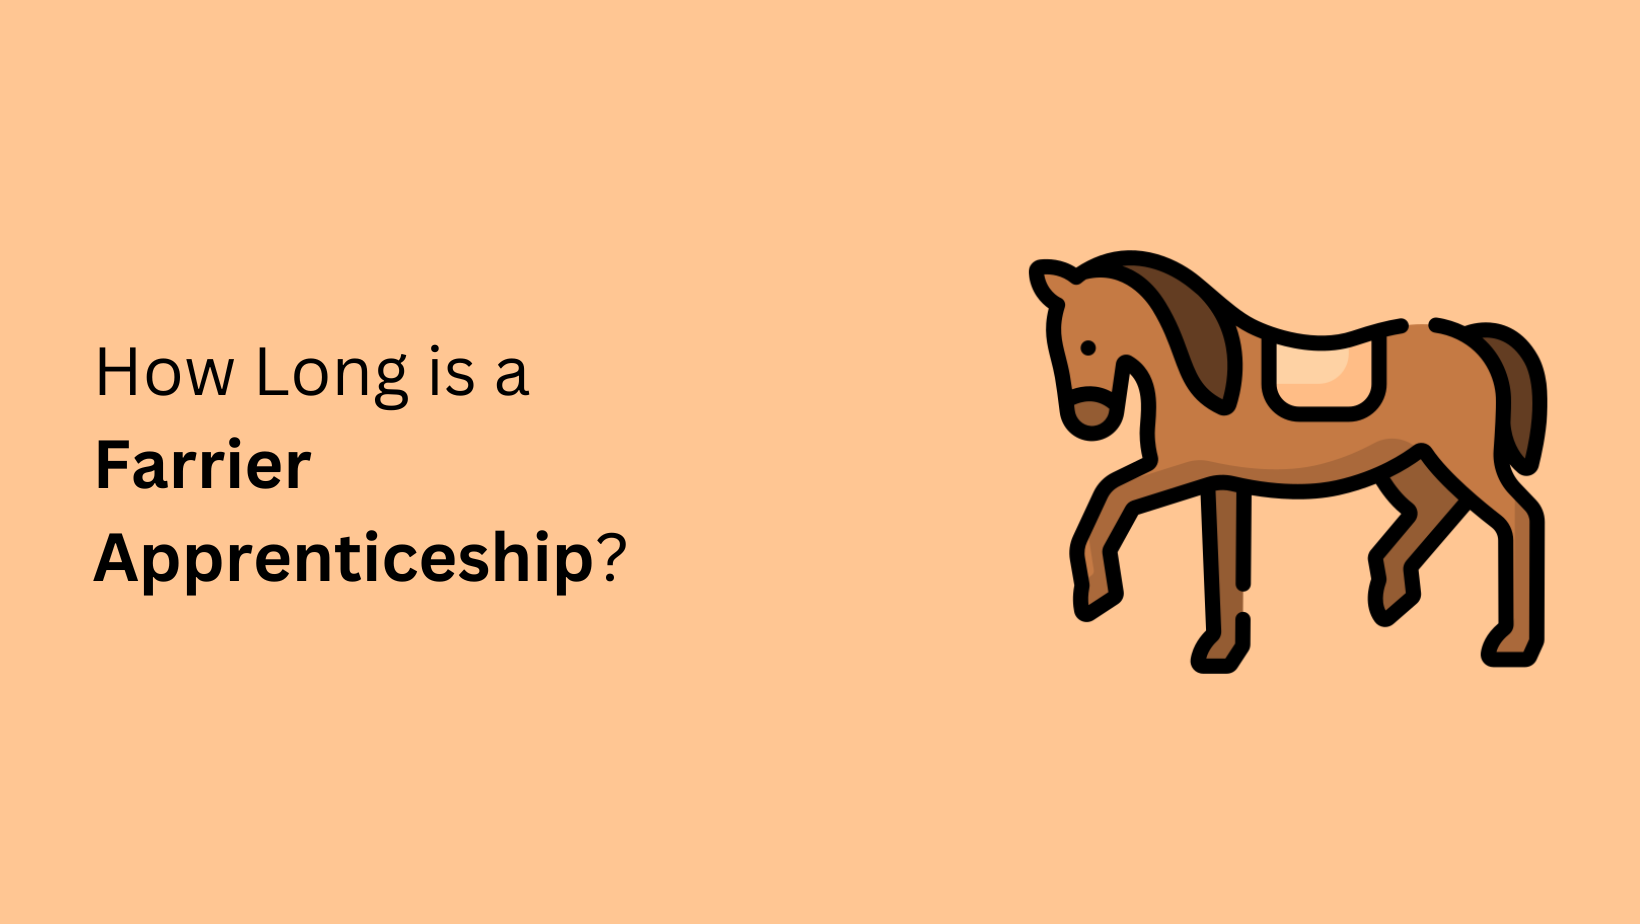 How Long is a Farrier Apprenticeship